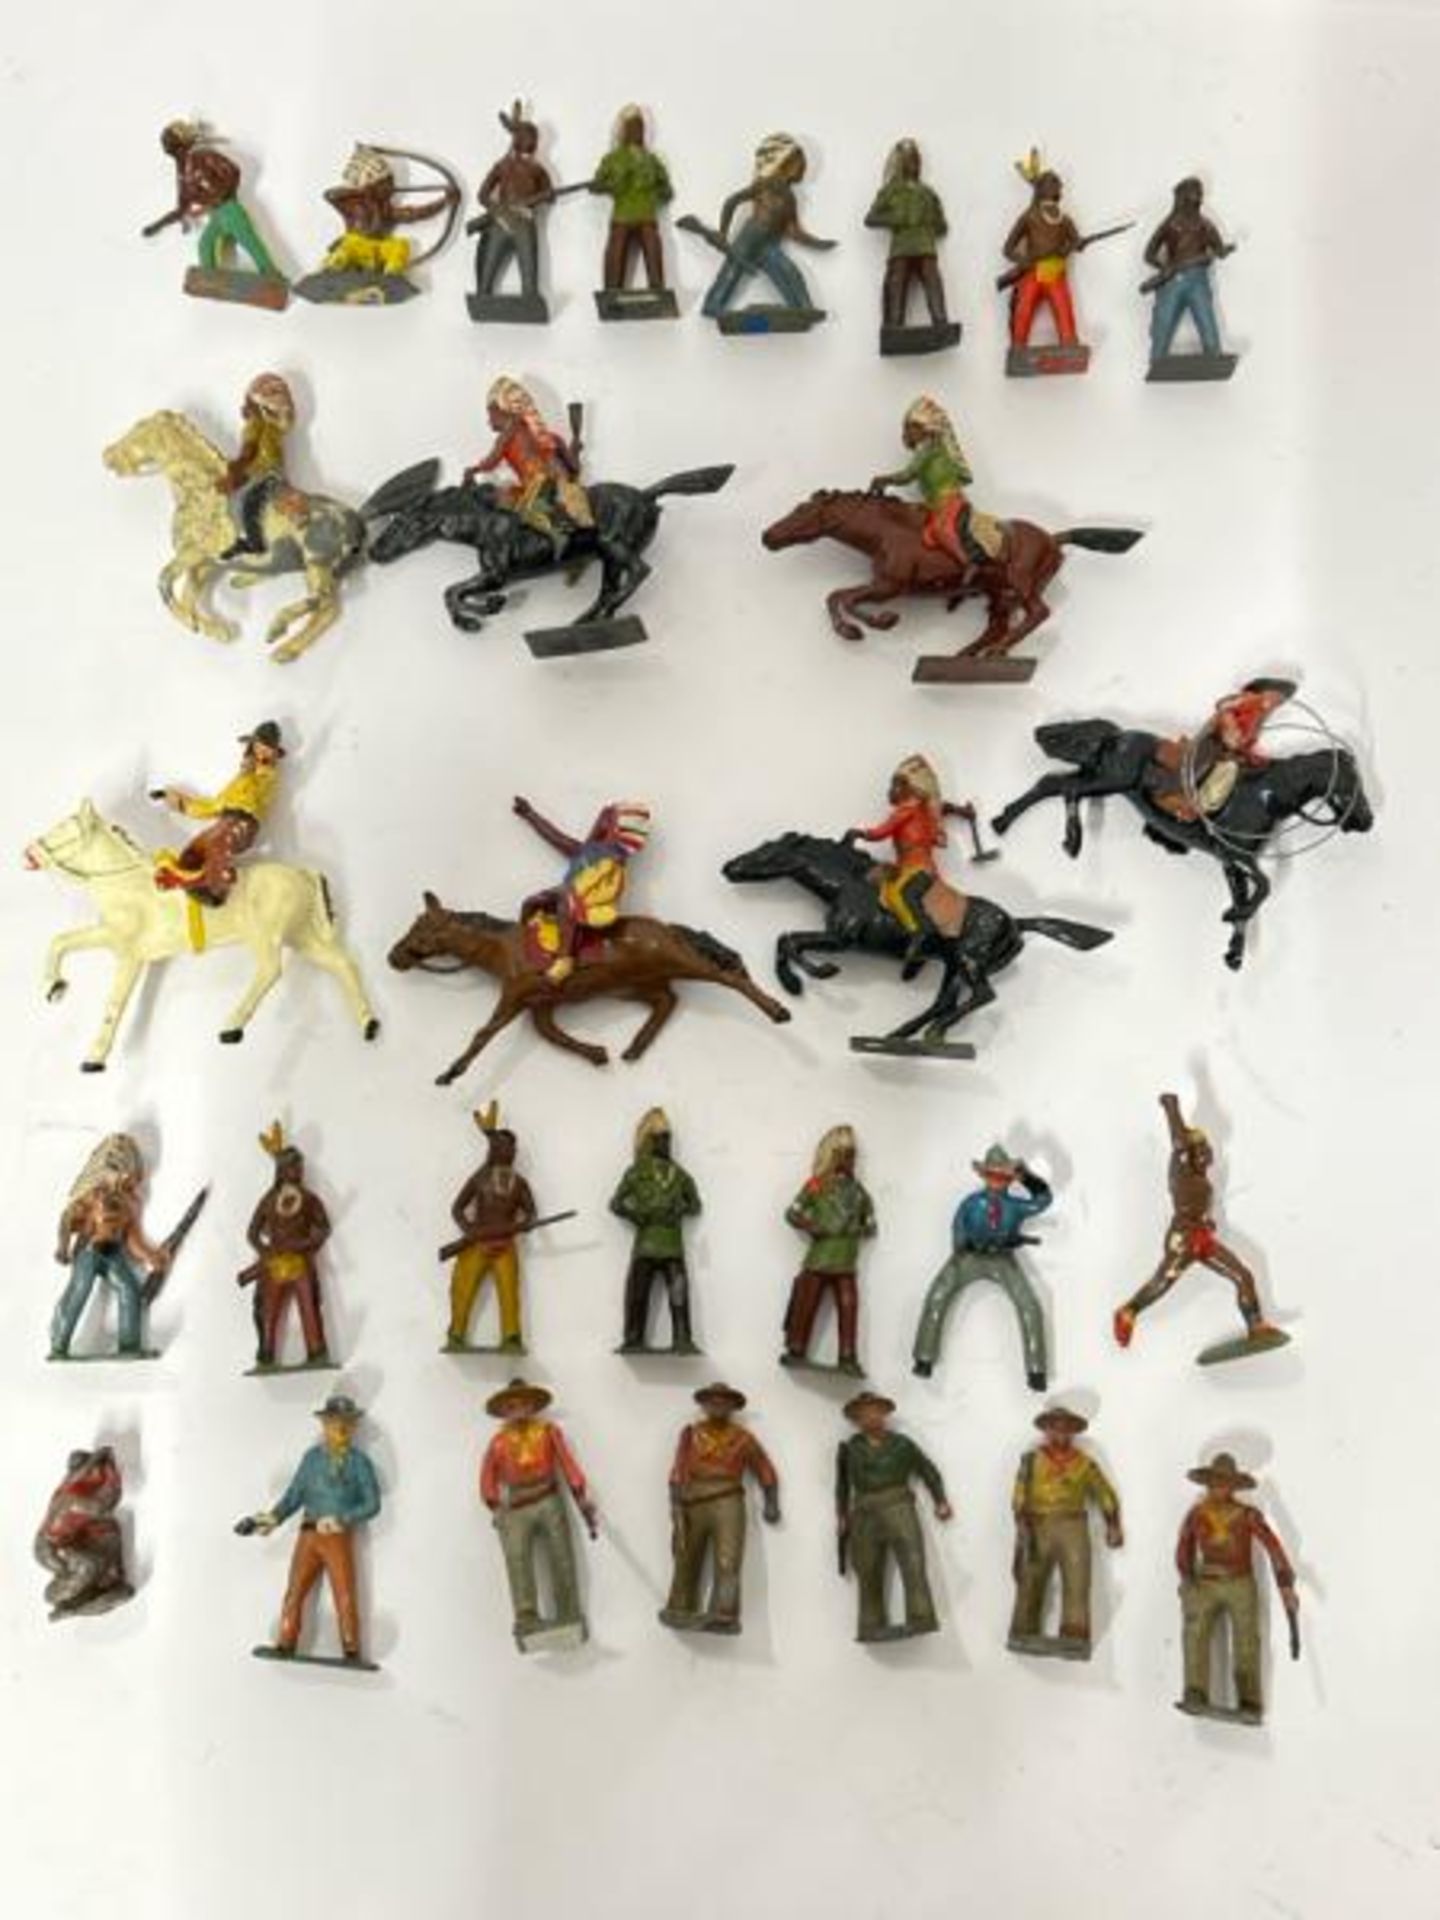 Mainly Britains lead 'Wild West' figures including horses, Cowboys and Native American warriors (29)